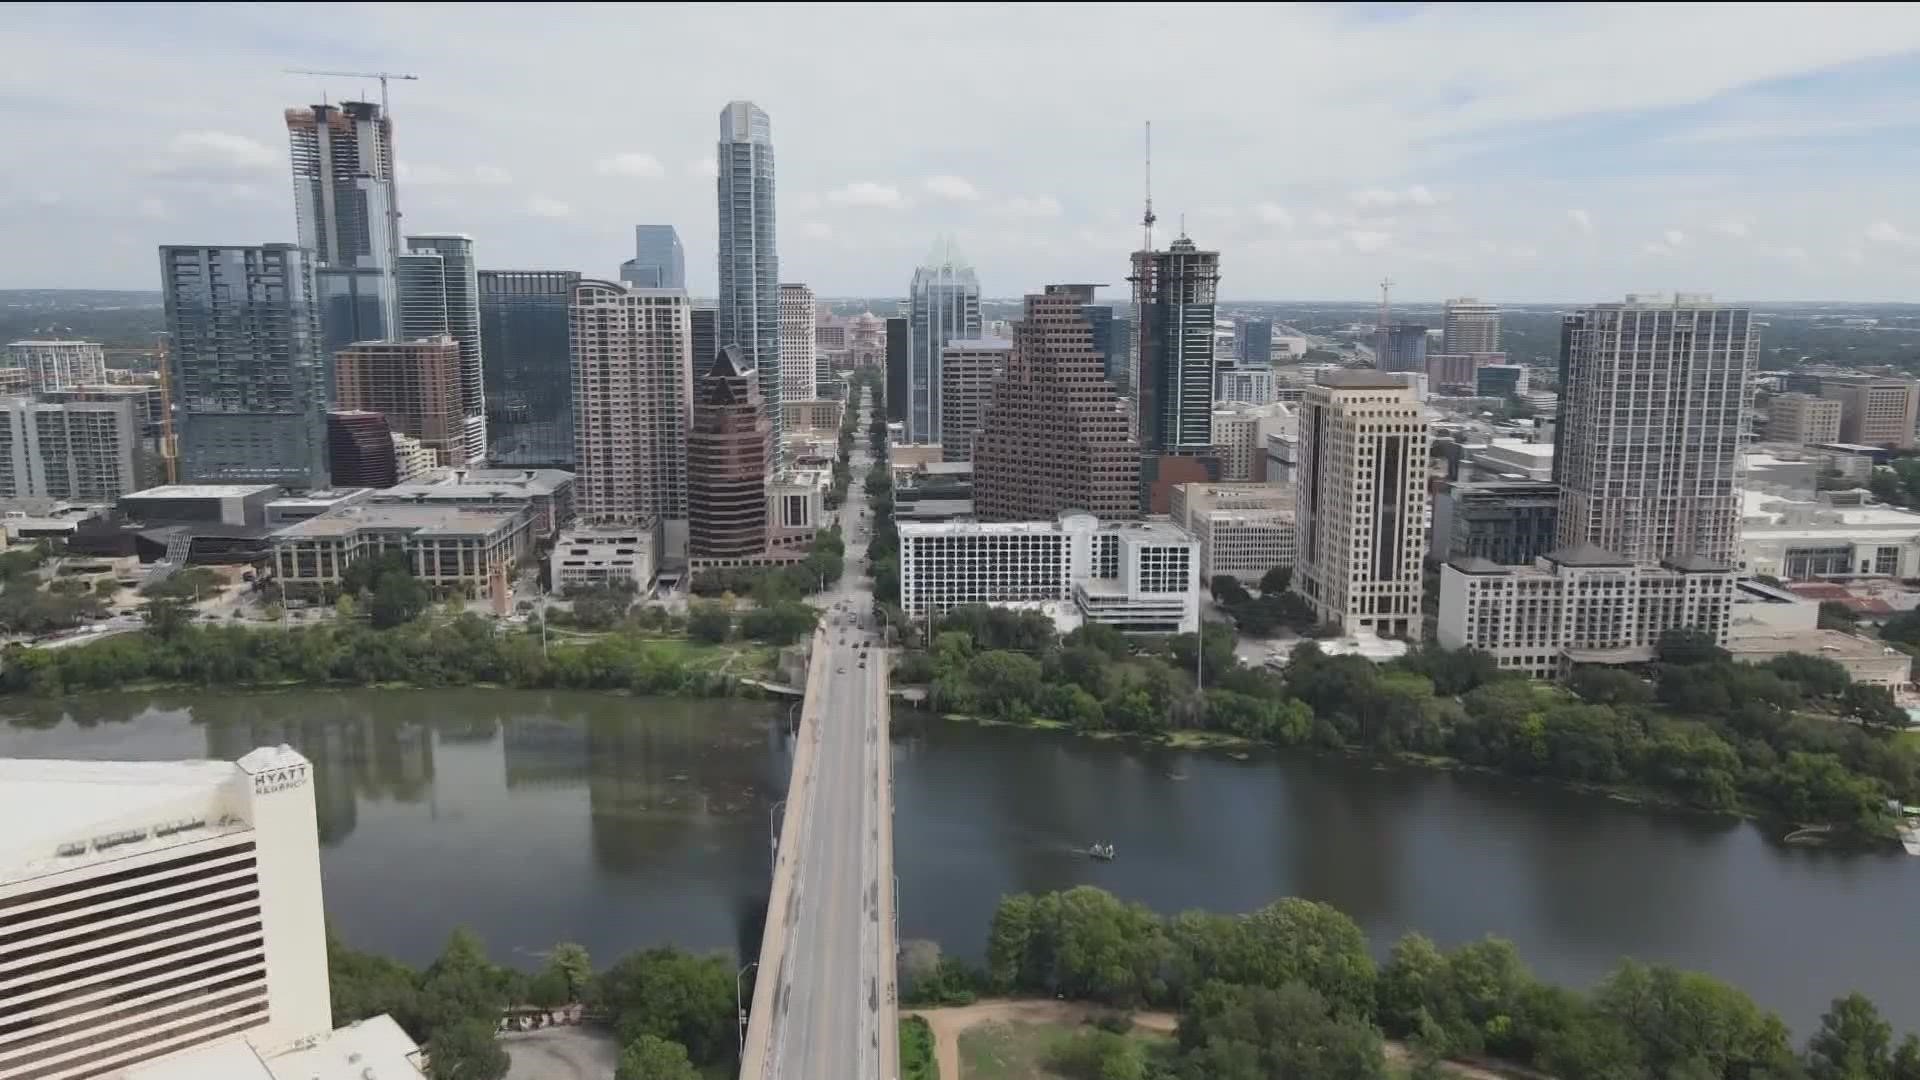 Austin Energy leaders say this increase is linked to the utility's rising overhead costs.